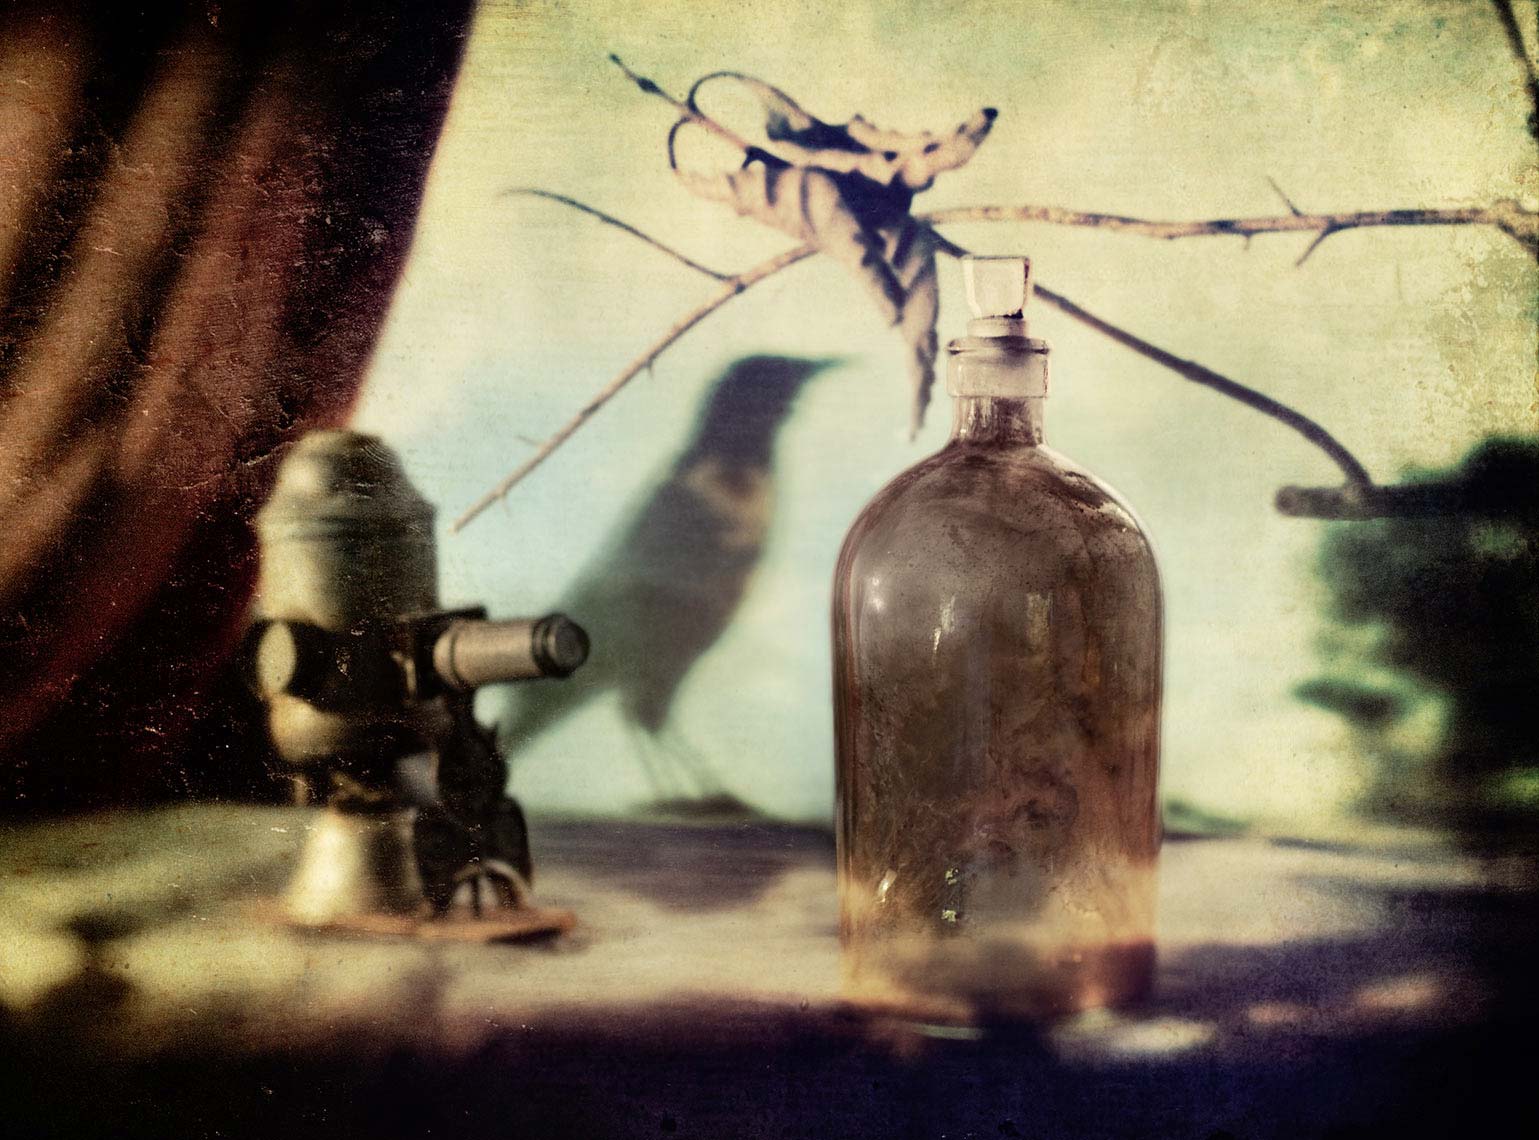 Still life of antique scientific object, vintage bottle, bird silhouette, drape and twig against soft-focus painterly mottled background